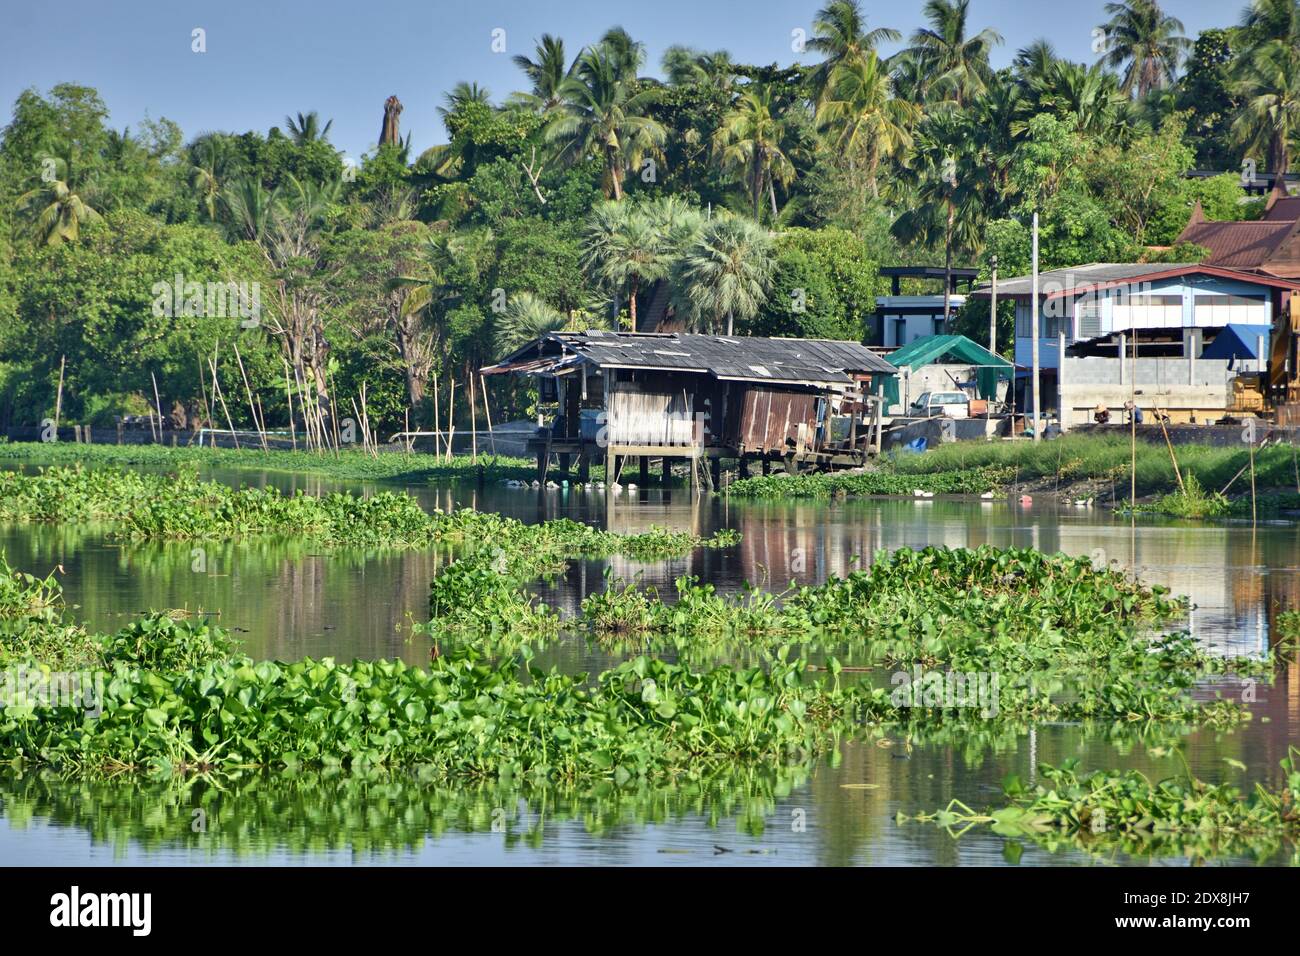 Thai houses on Nakhon Chai Si river, Thailand. Green water hyacinth floating on the river and coconut trees in the background. Stock Photo